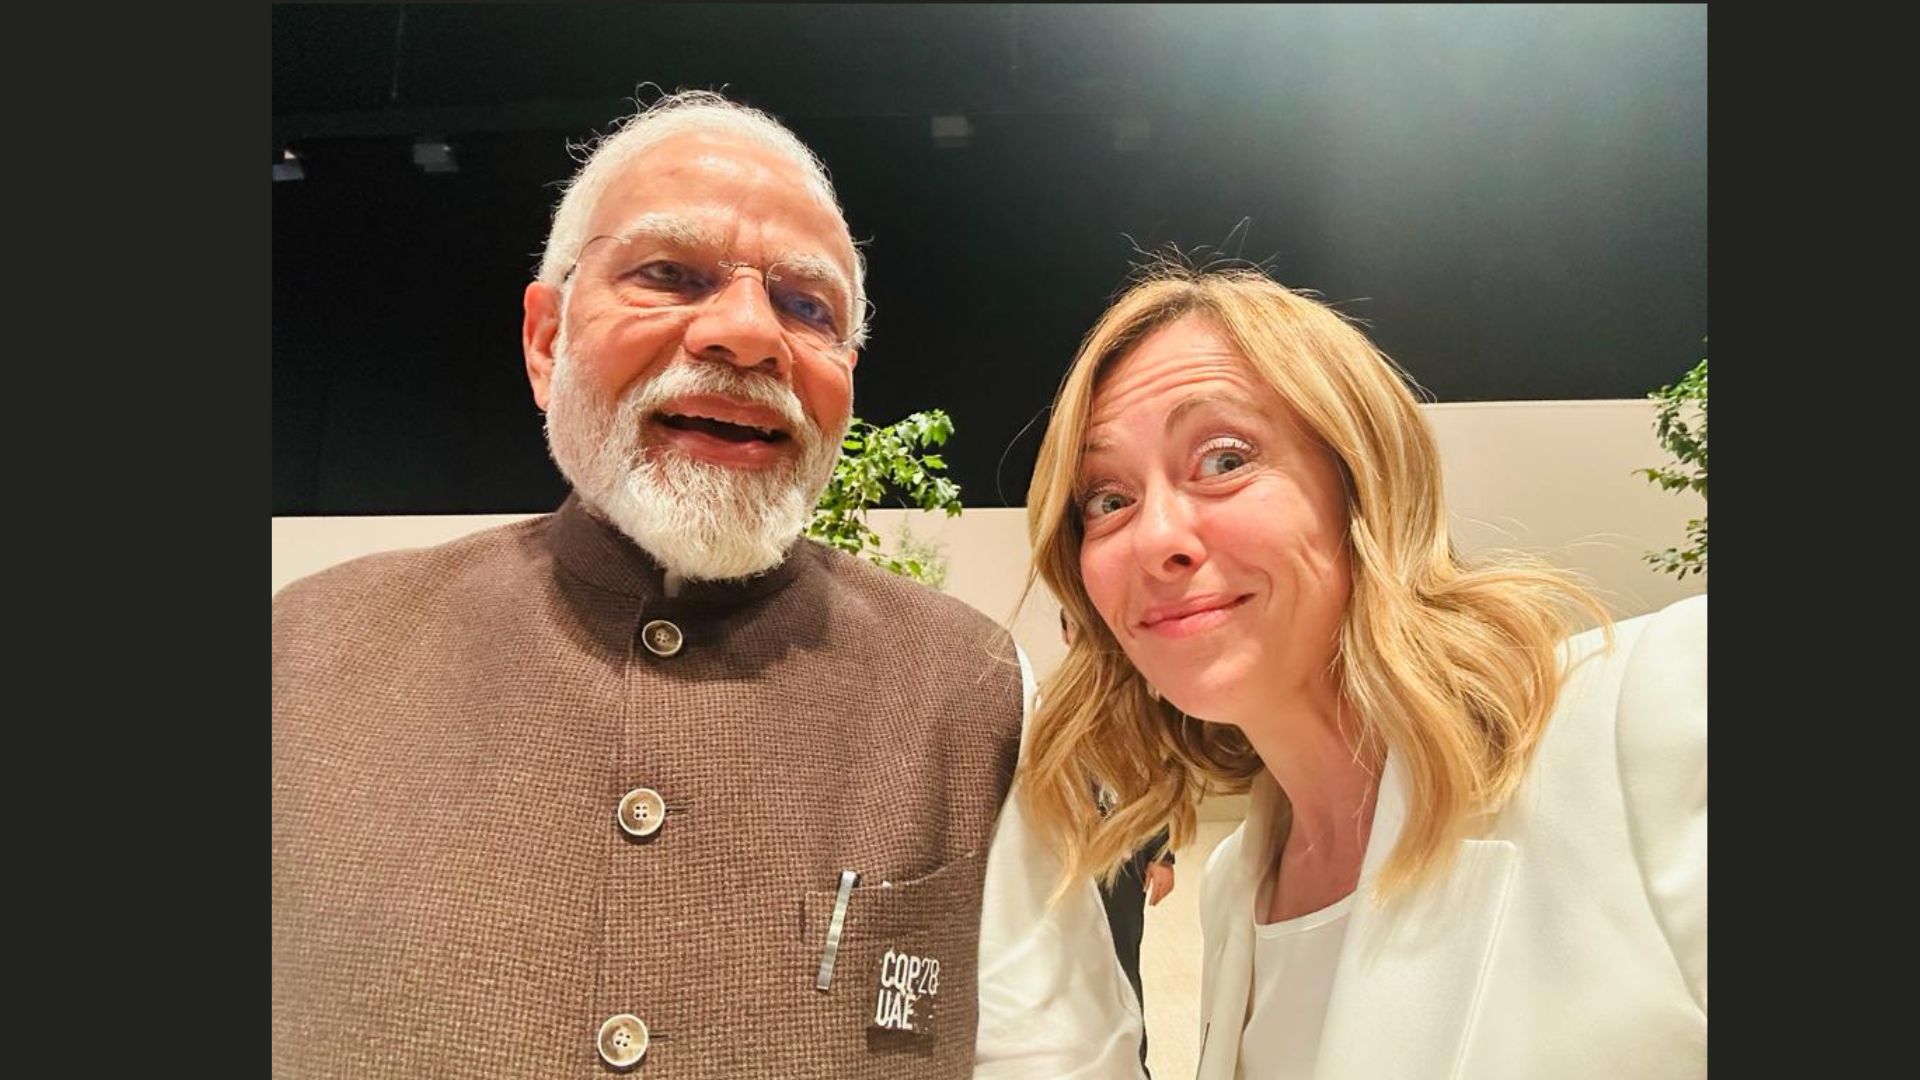 Meeting friends is always a delight says PM MODI